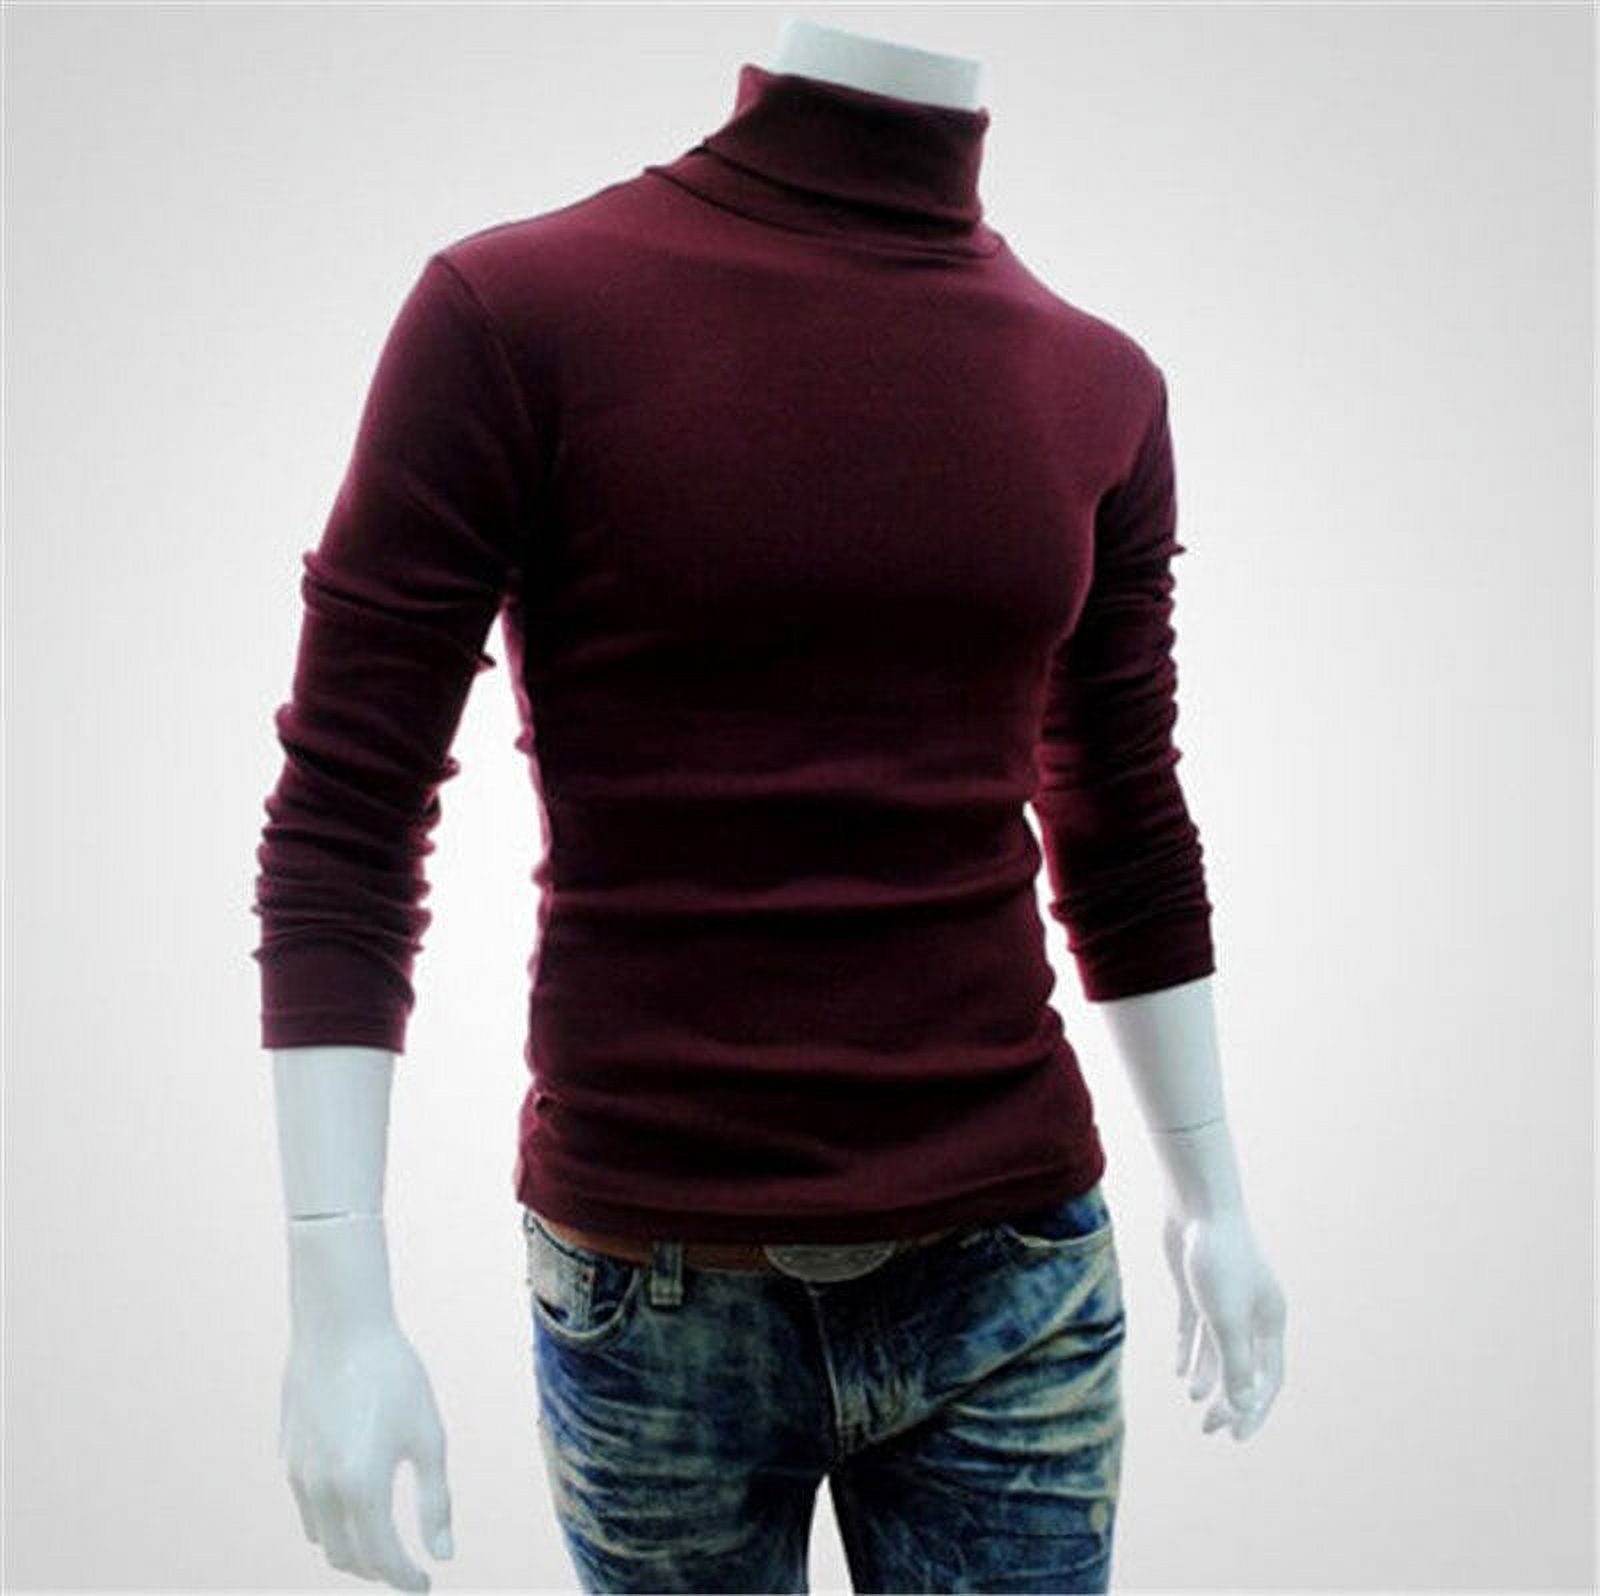 Seyurigaoka Fashion Mens Polo Roll Turtle Neck Pullover Knitted Jumper Tops Sweater Shirt - image 5 of 6